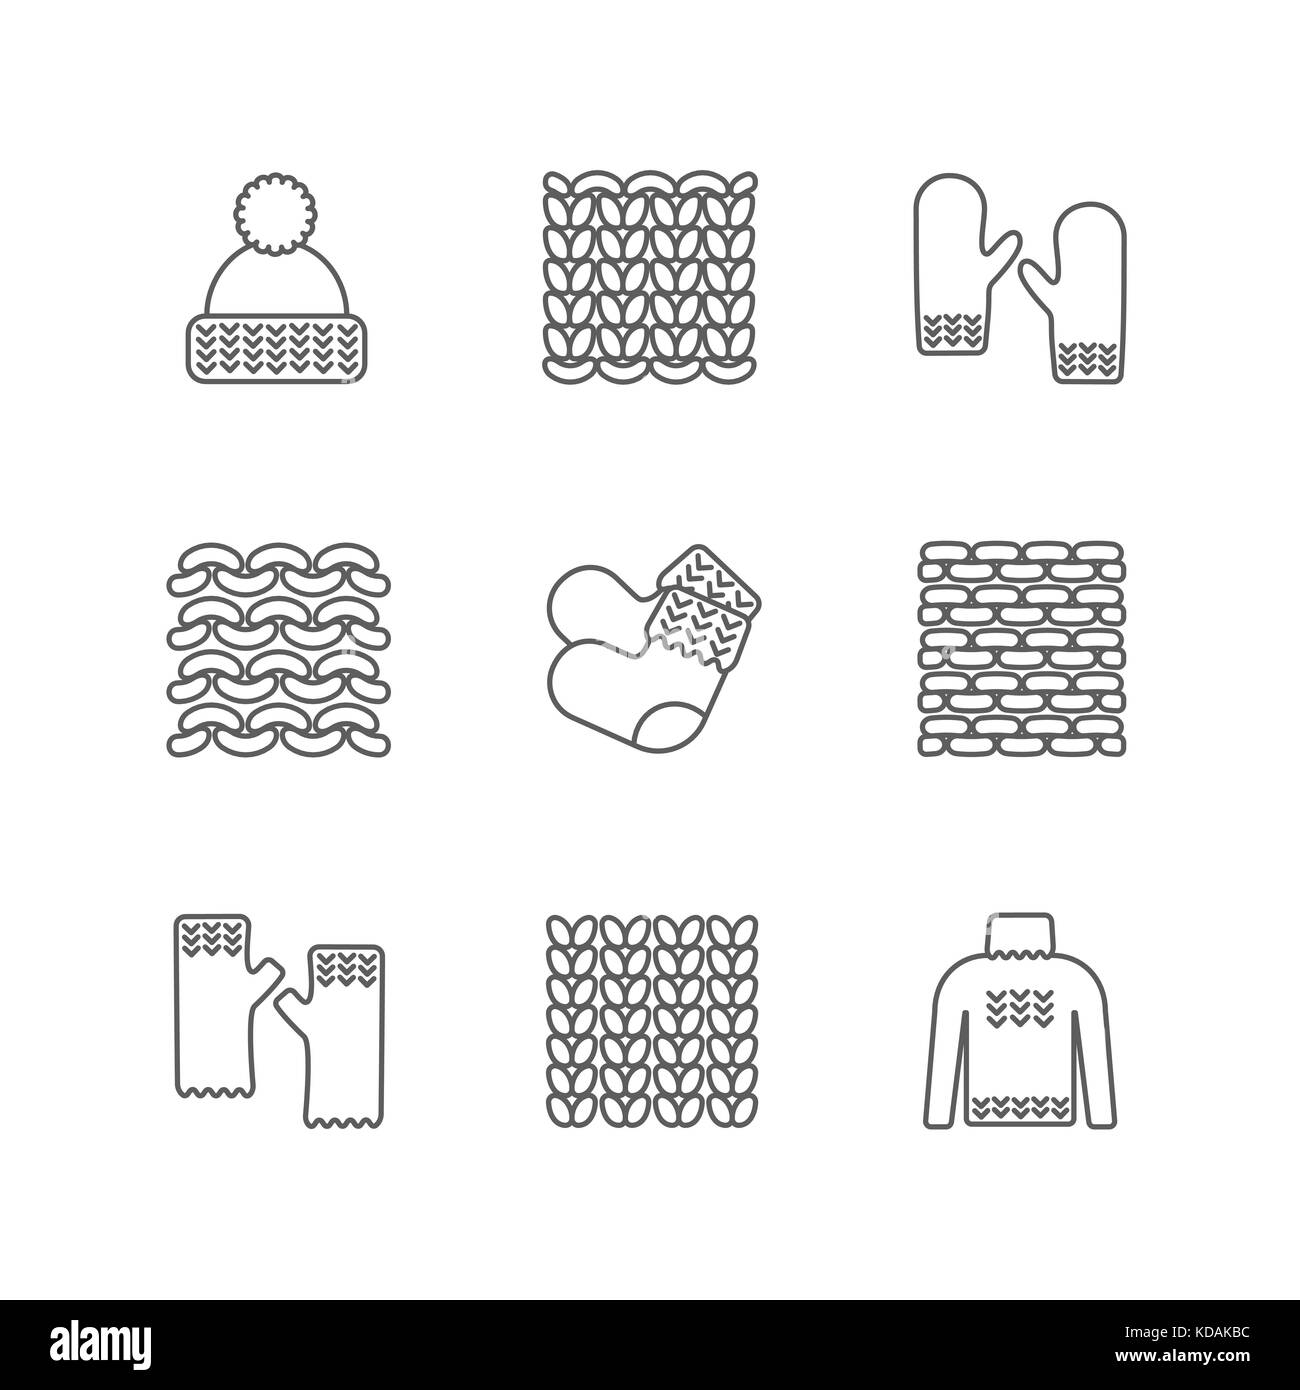 Knittind clothes, knitted samples thin line icons. Hat, mittens, socks, sweater and other hand-knitted garments. Knit vector set Stock Vector